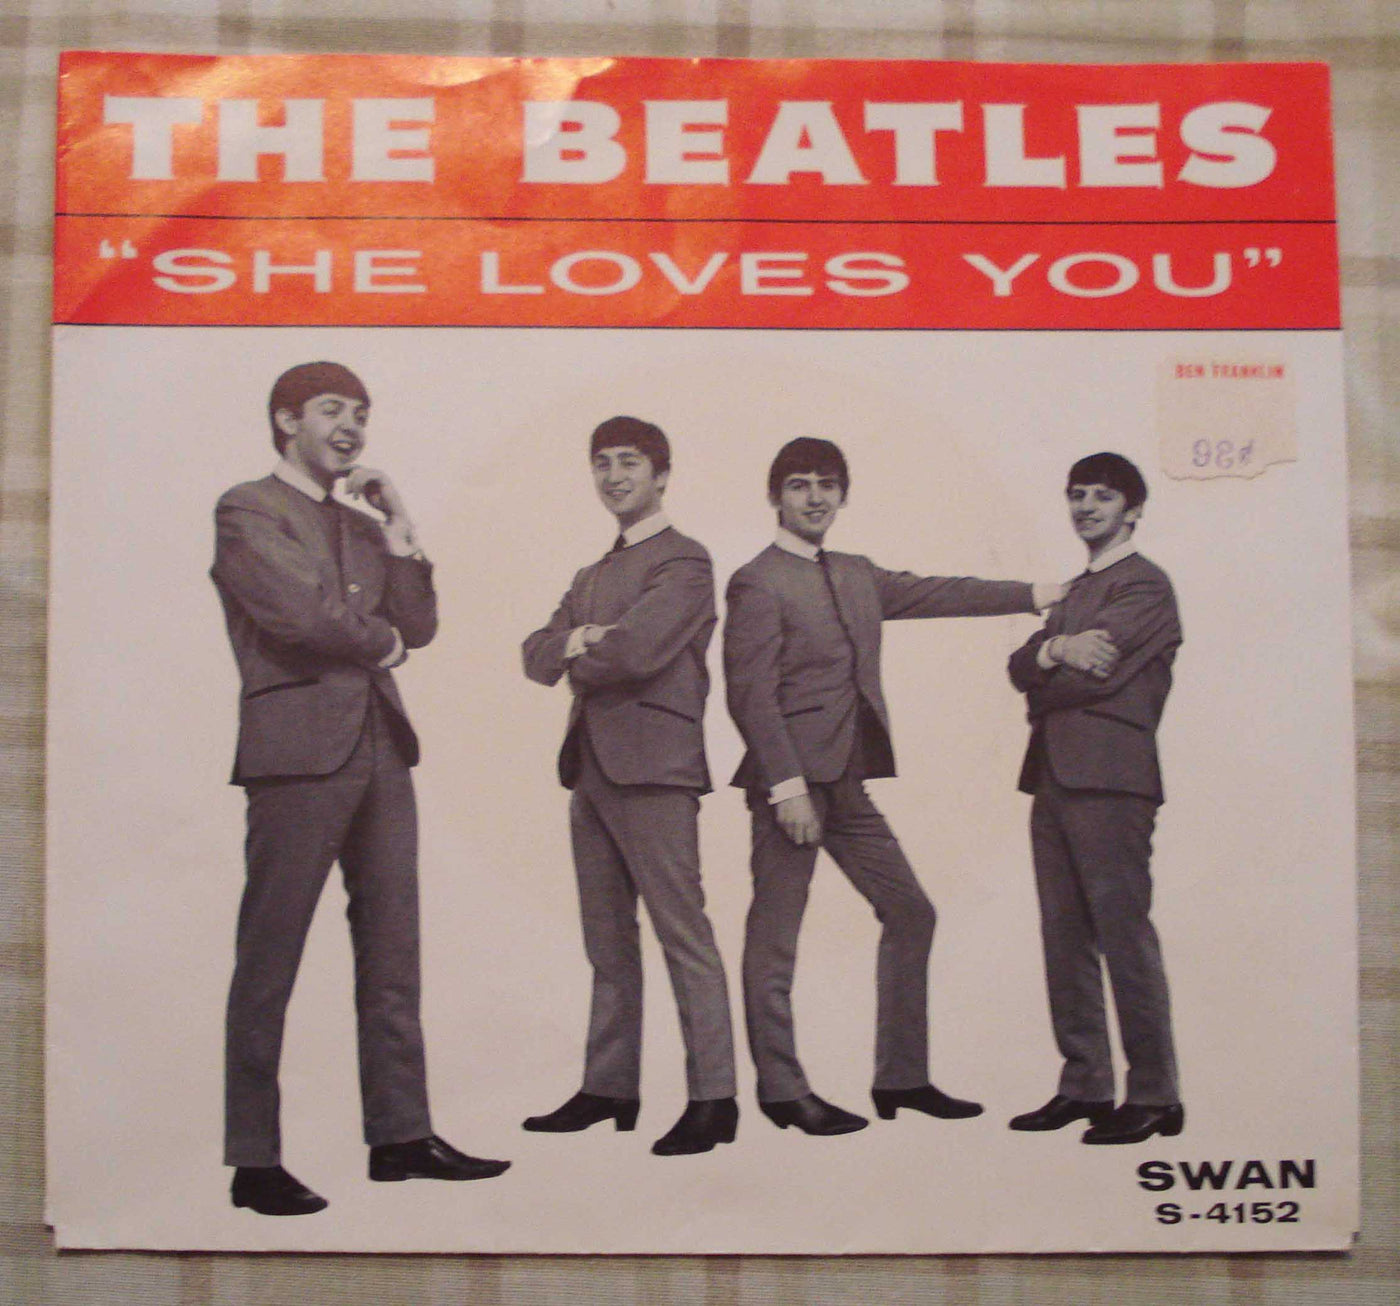 The Beatles - She Loves You- I'll Get You (1964) Vinyl Single 45 RPM Record S-4152